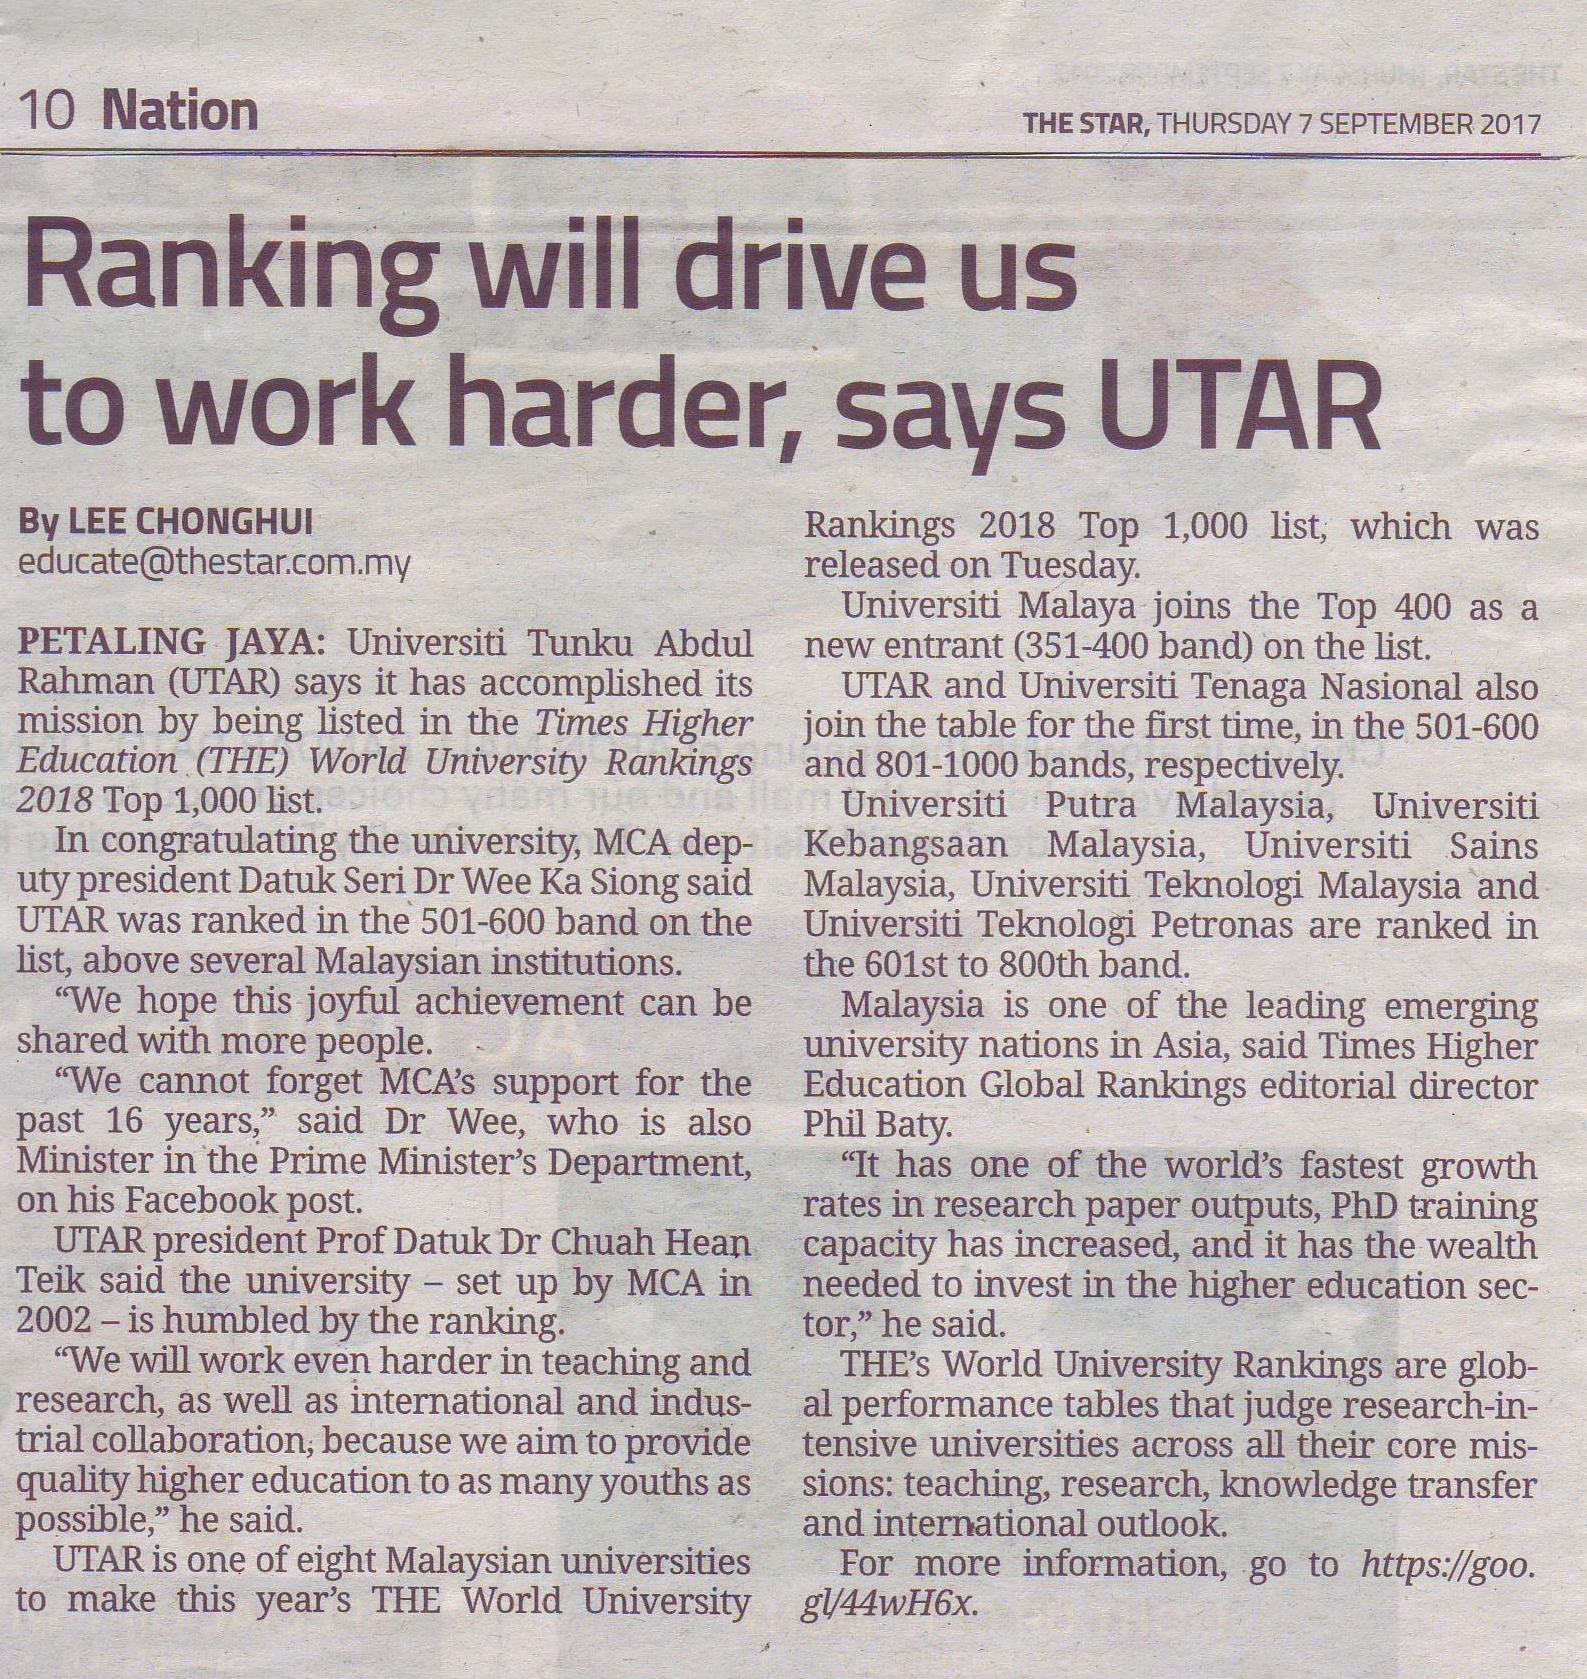  Ranking will drive us to work harder, says UTAR.